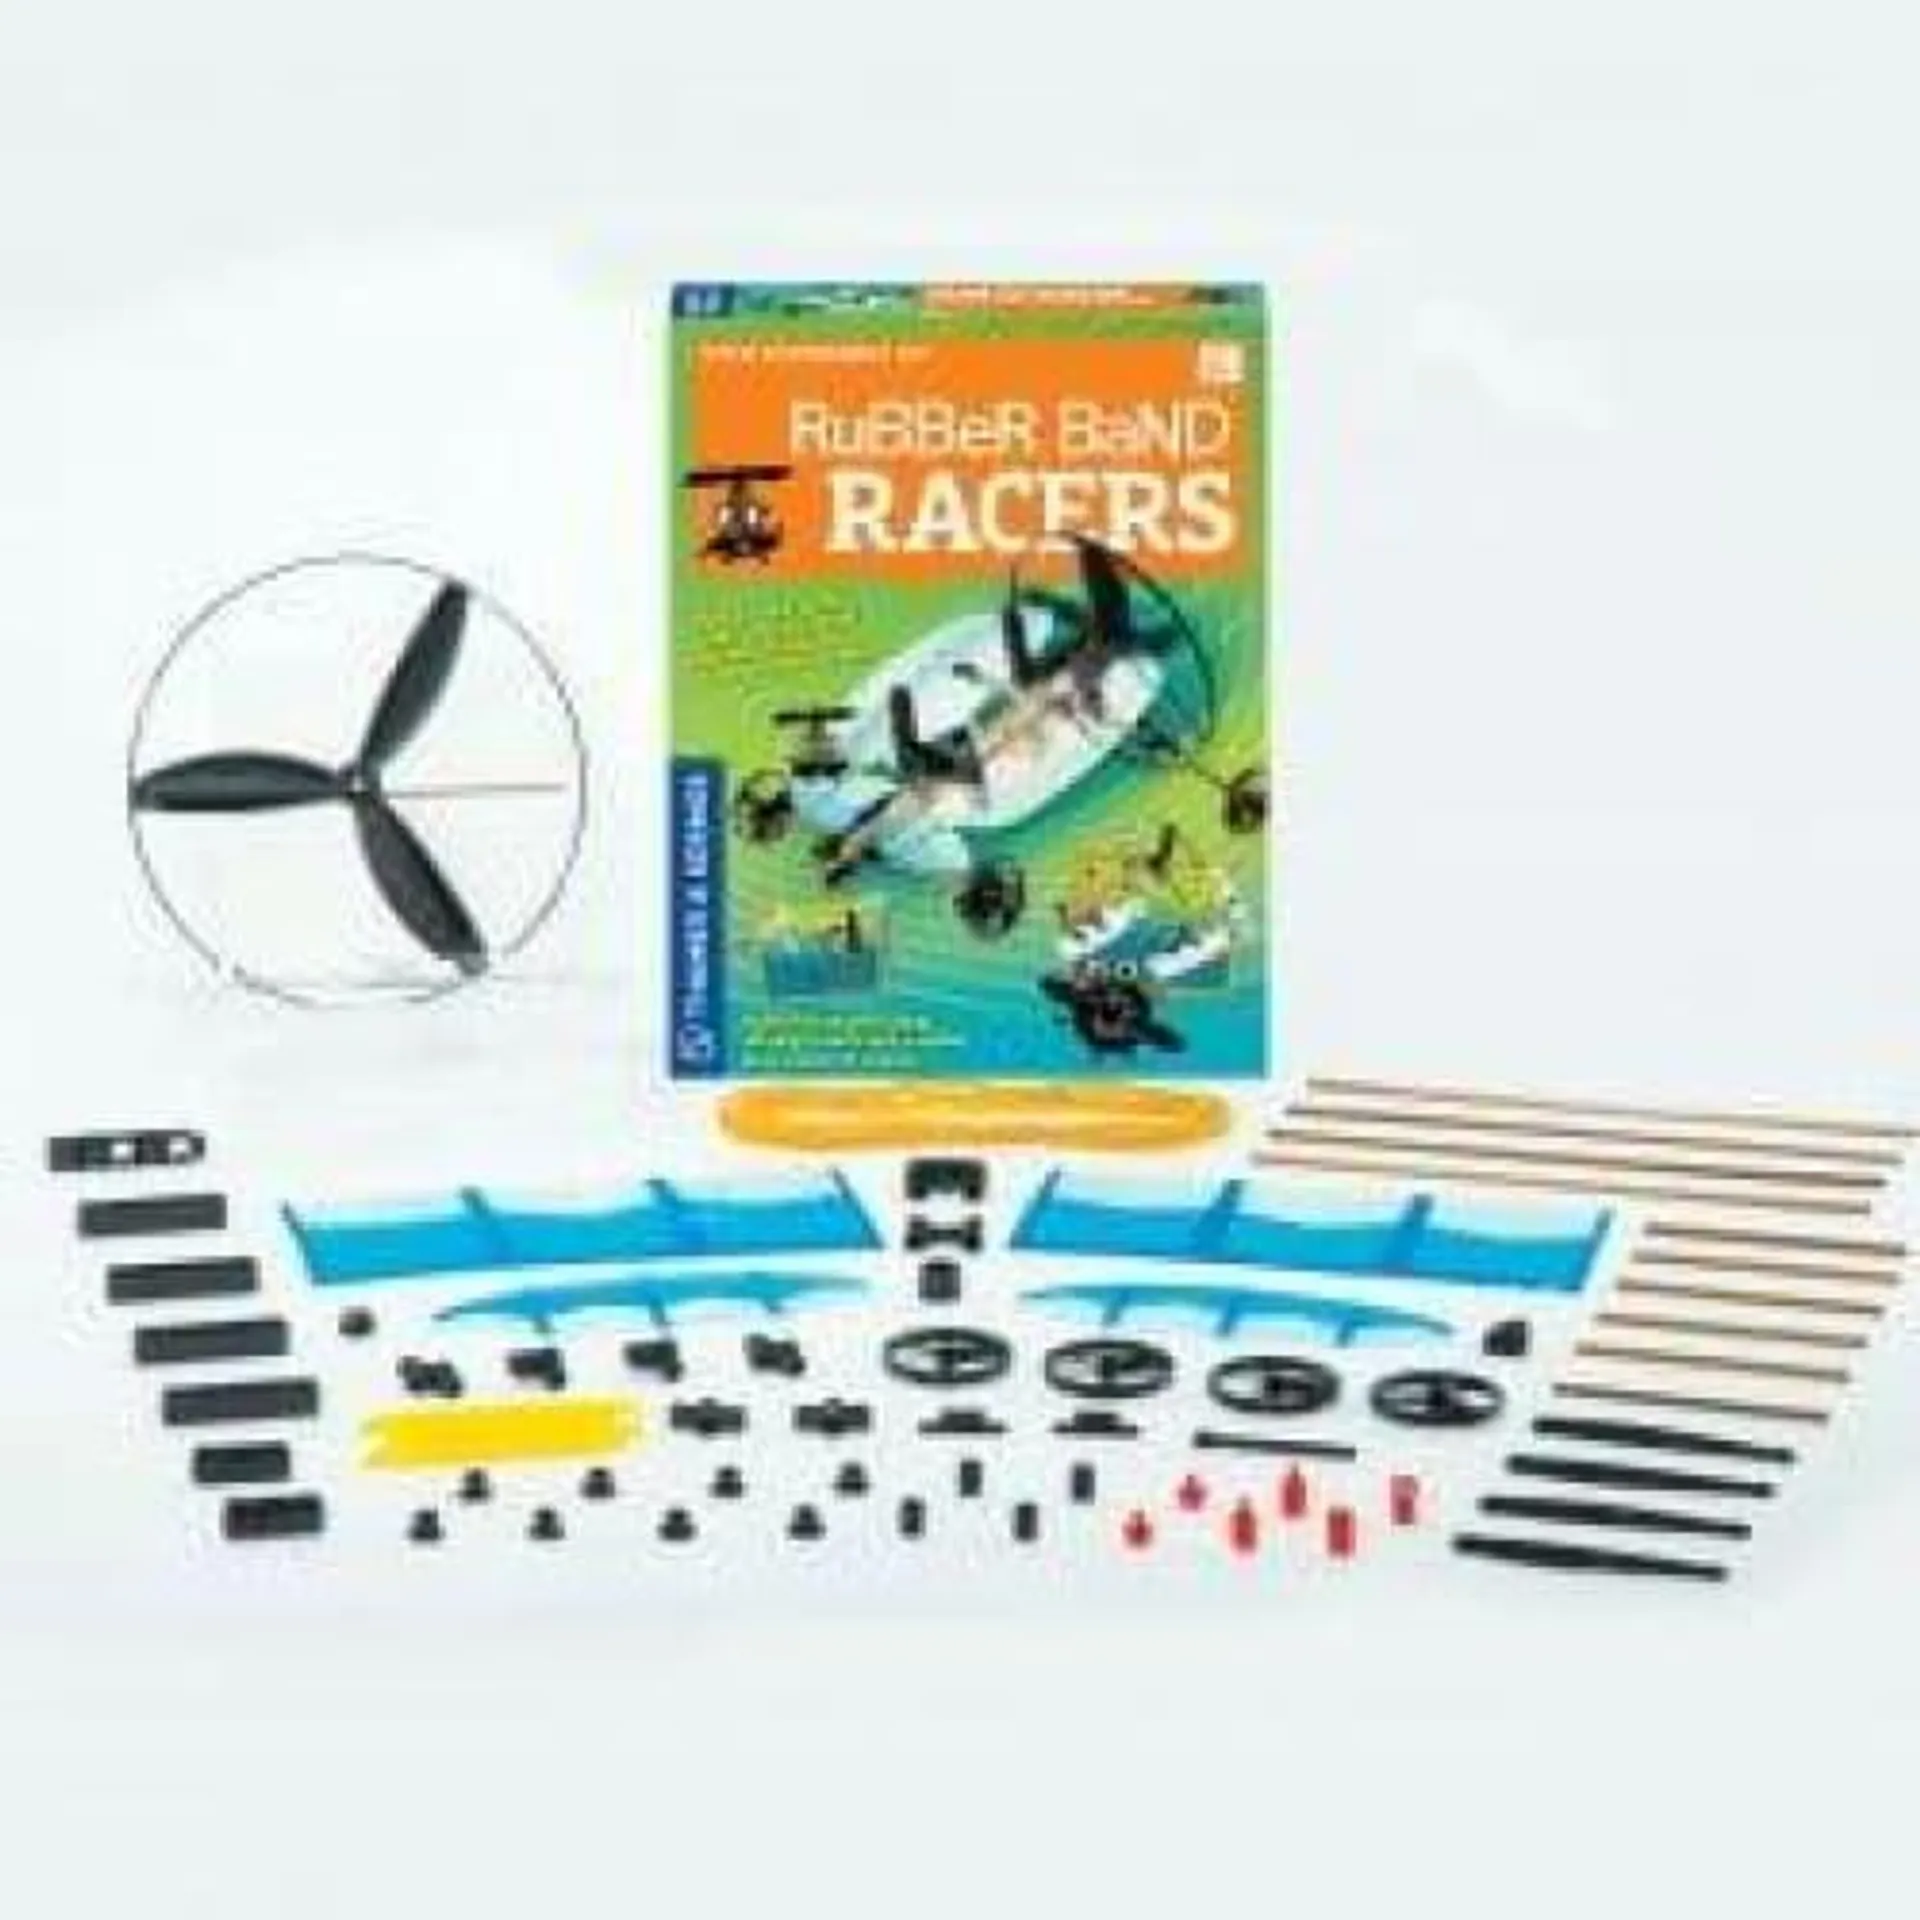 Thames and Kosmos Rubber Bands Racers